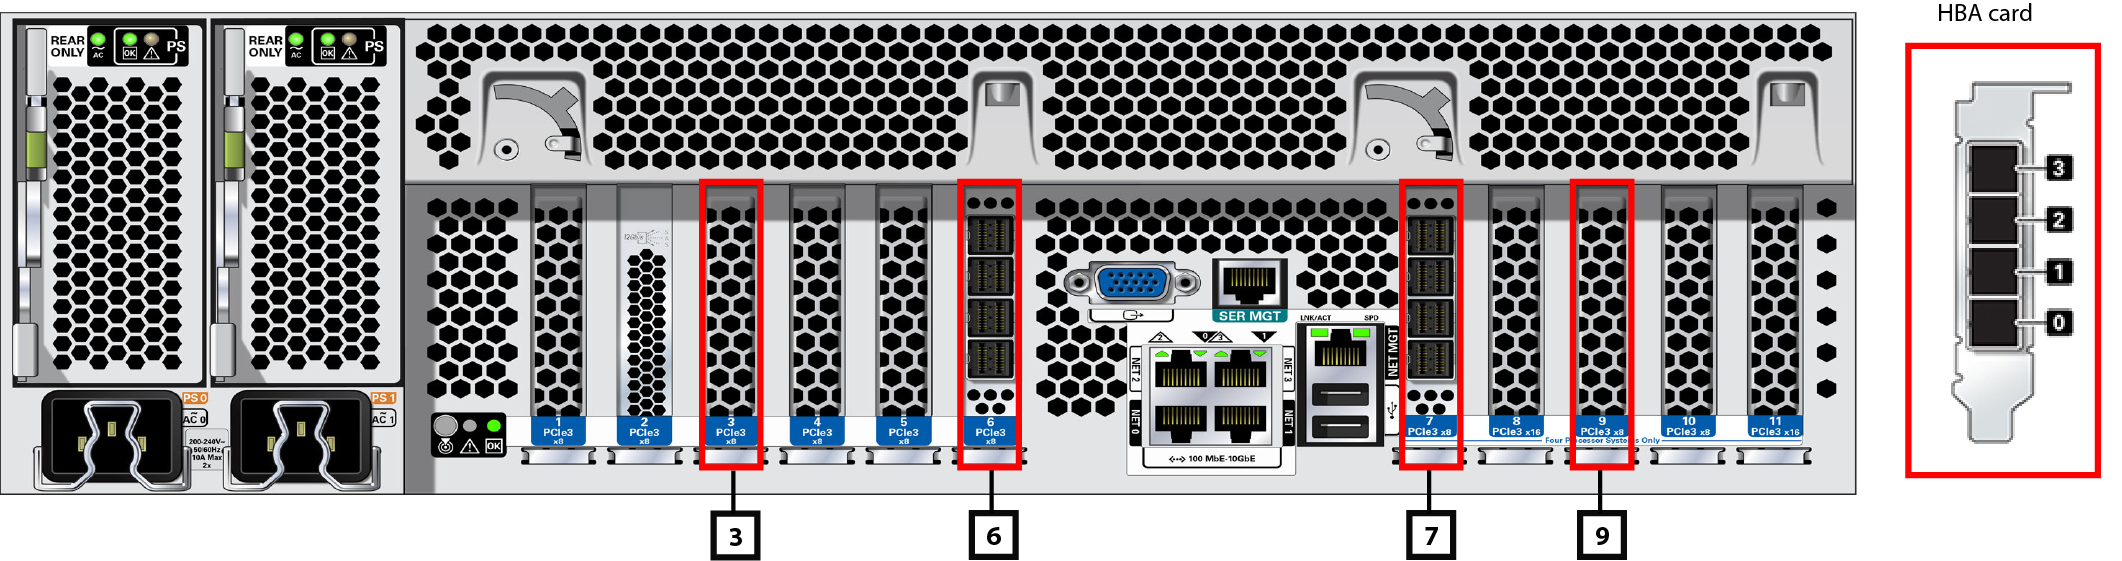 This image shows the Oracle ZFS Storage ZS5-4 back panel with HBA port numbers.